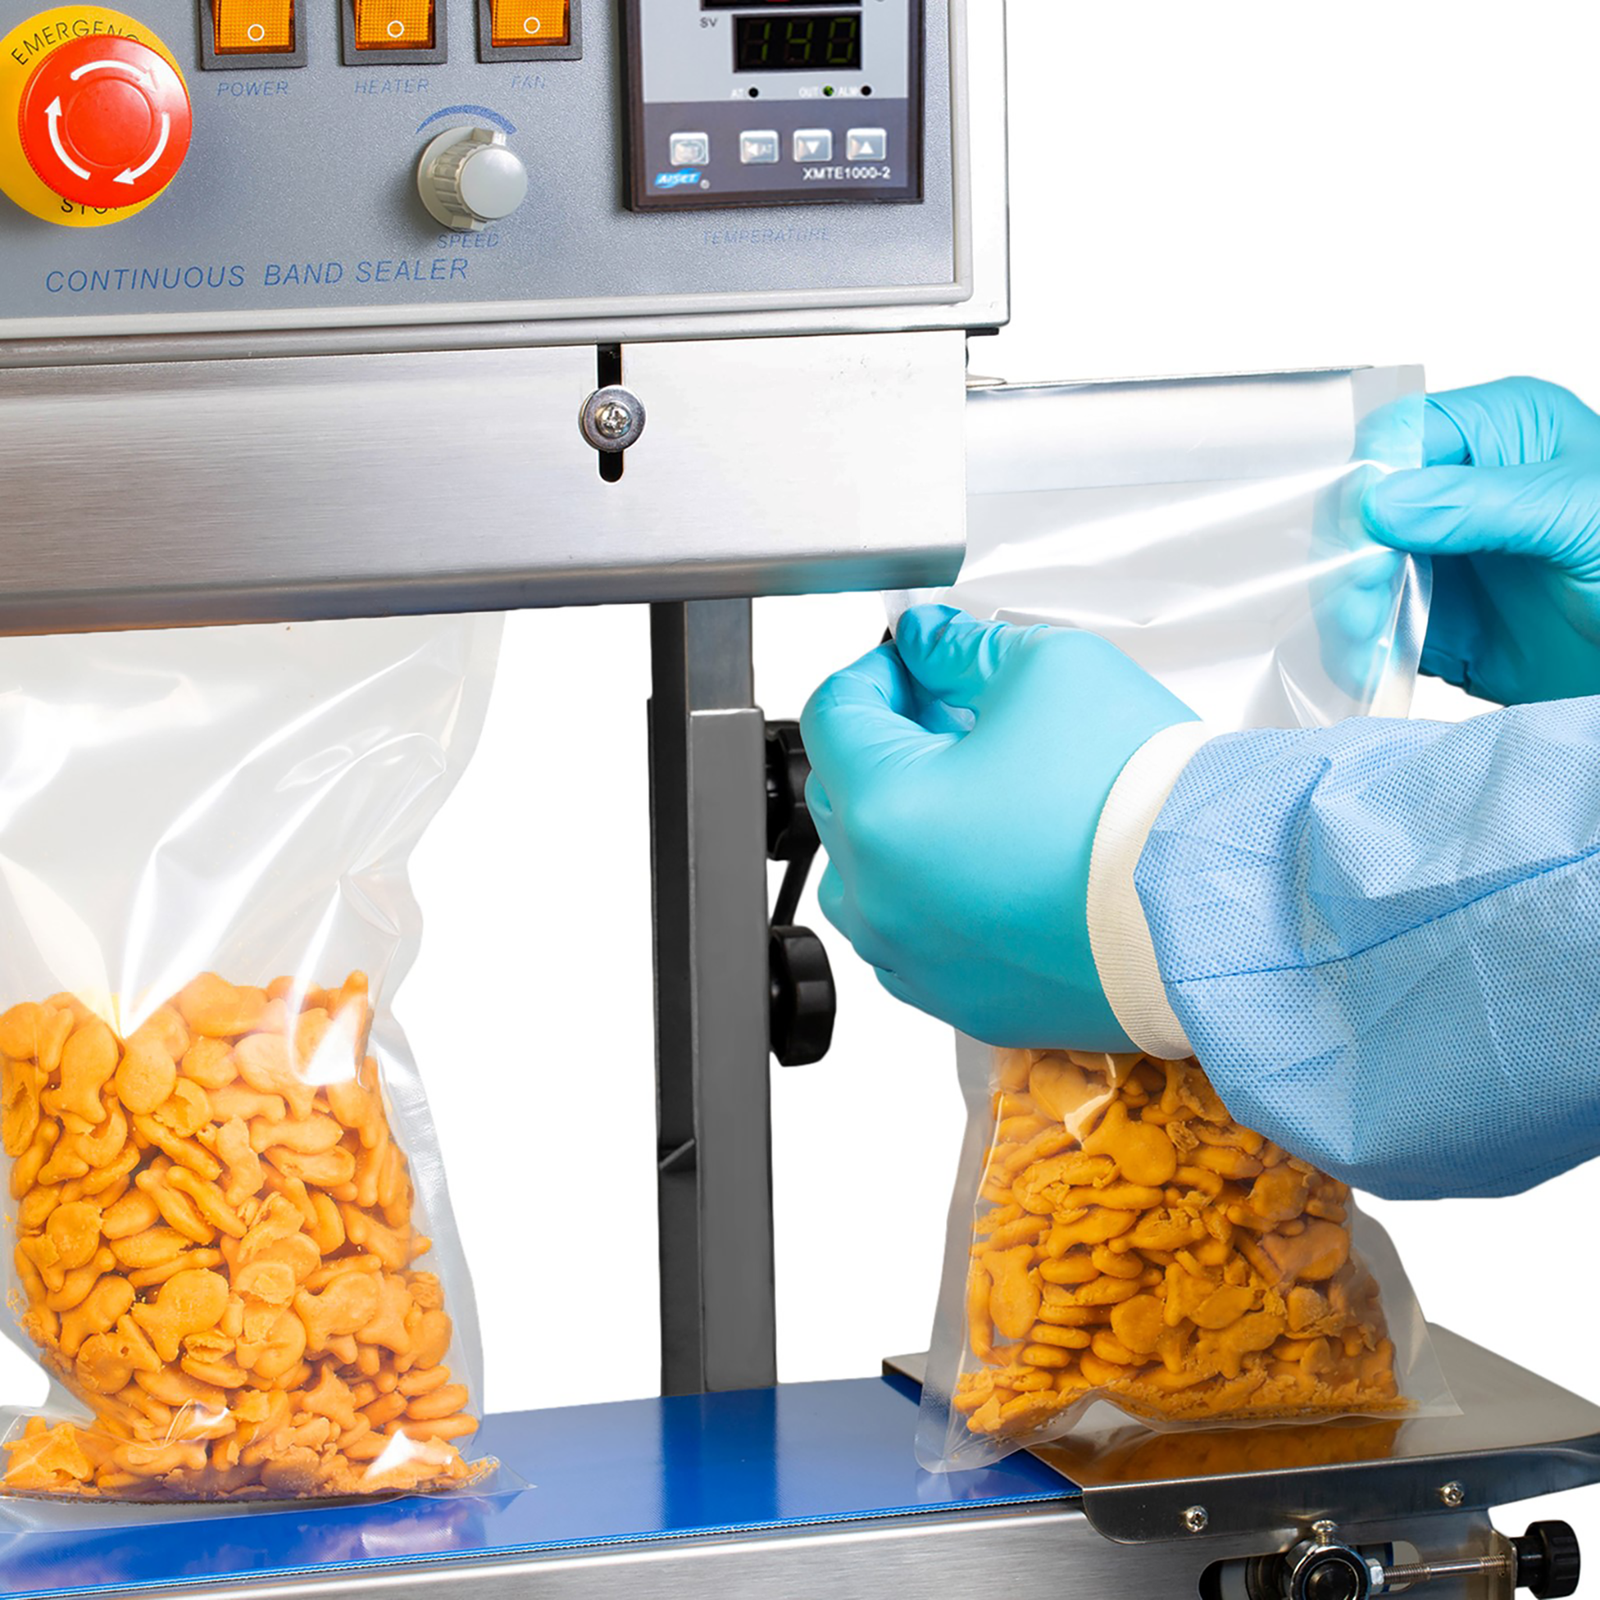 operator wearing blue gloves inserting several plastic bags with orange crackers in a vertical JORESTECH stainless-steel continuous band sealing machine